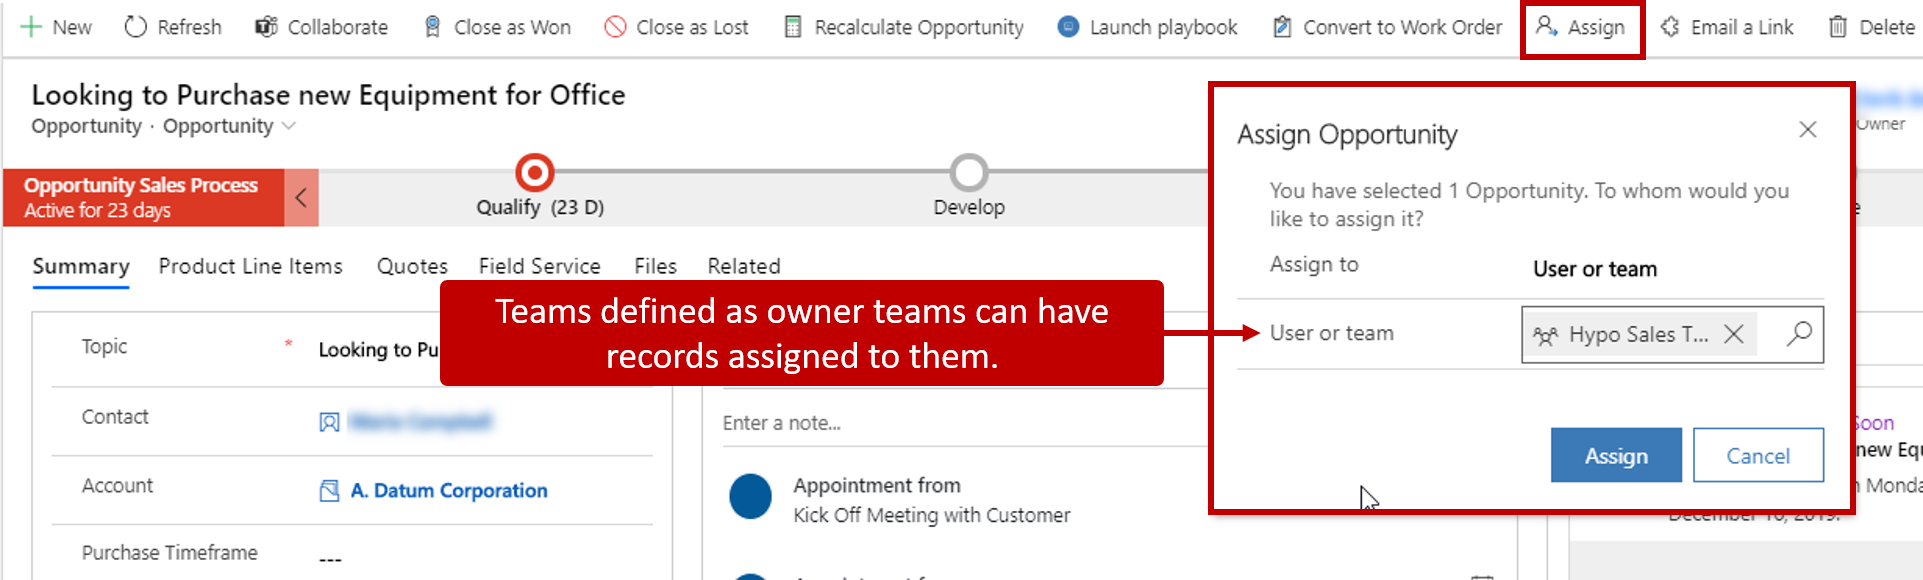 Assigning an opportunity to a team. Teams defined as owner teams can have records assigned to them.